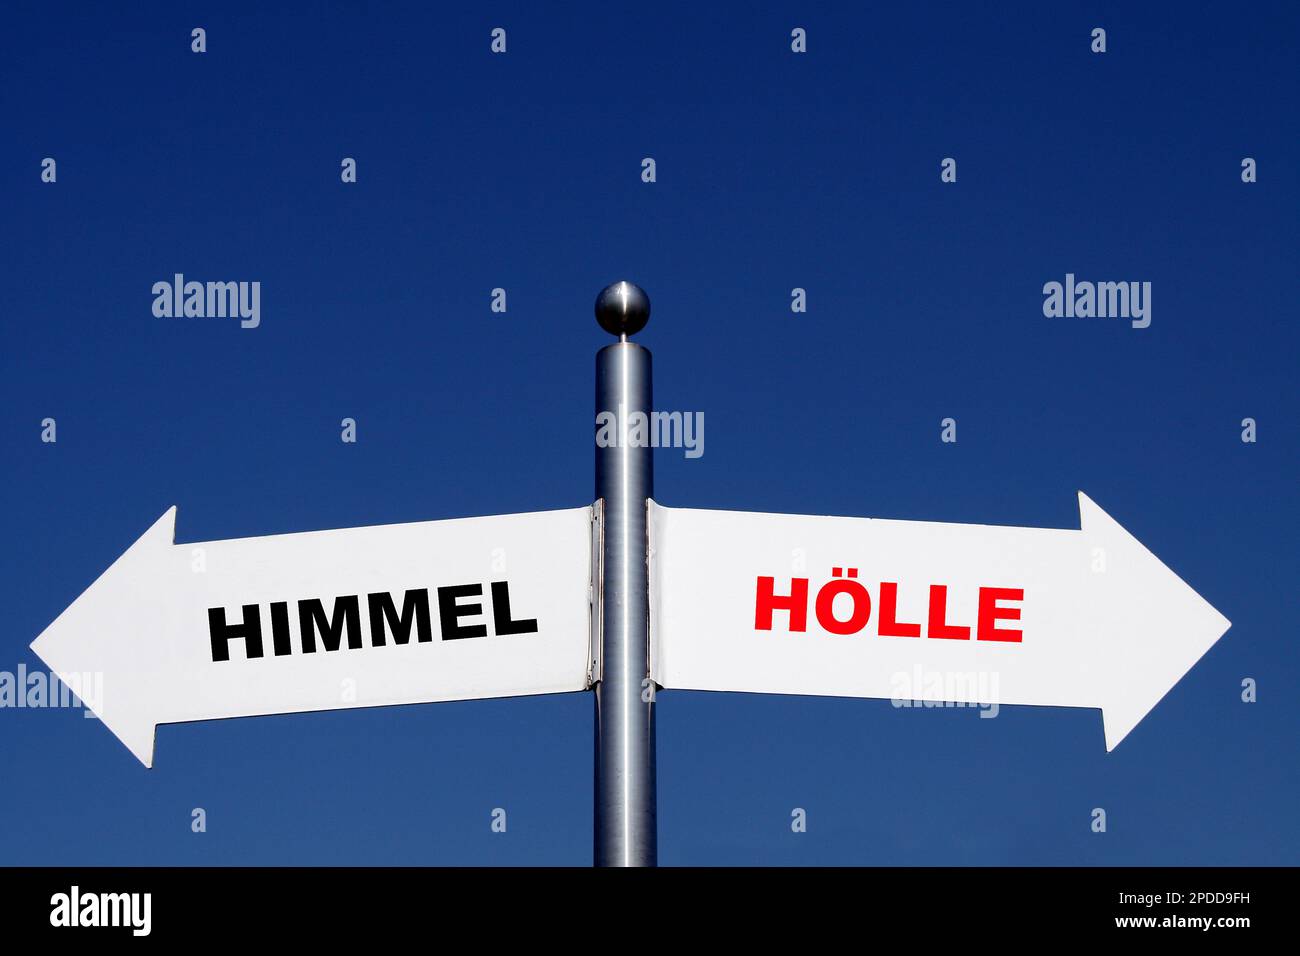 signposts pointing in different directions, options Himmel - Hoelle, sky - hell Stock Photo